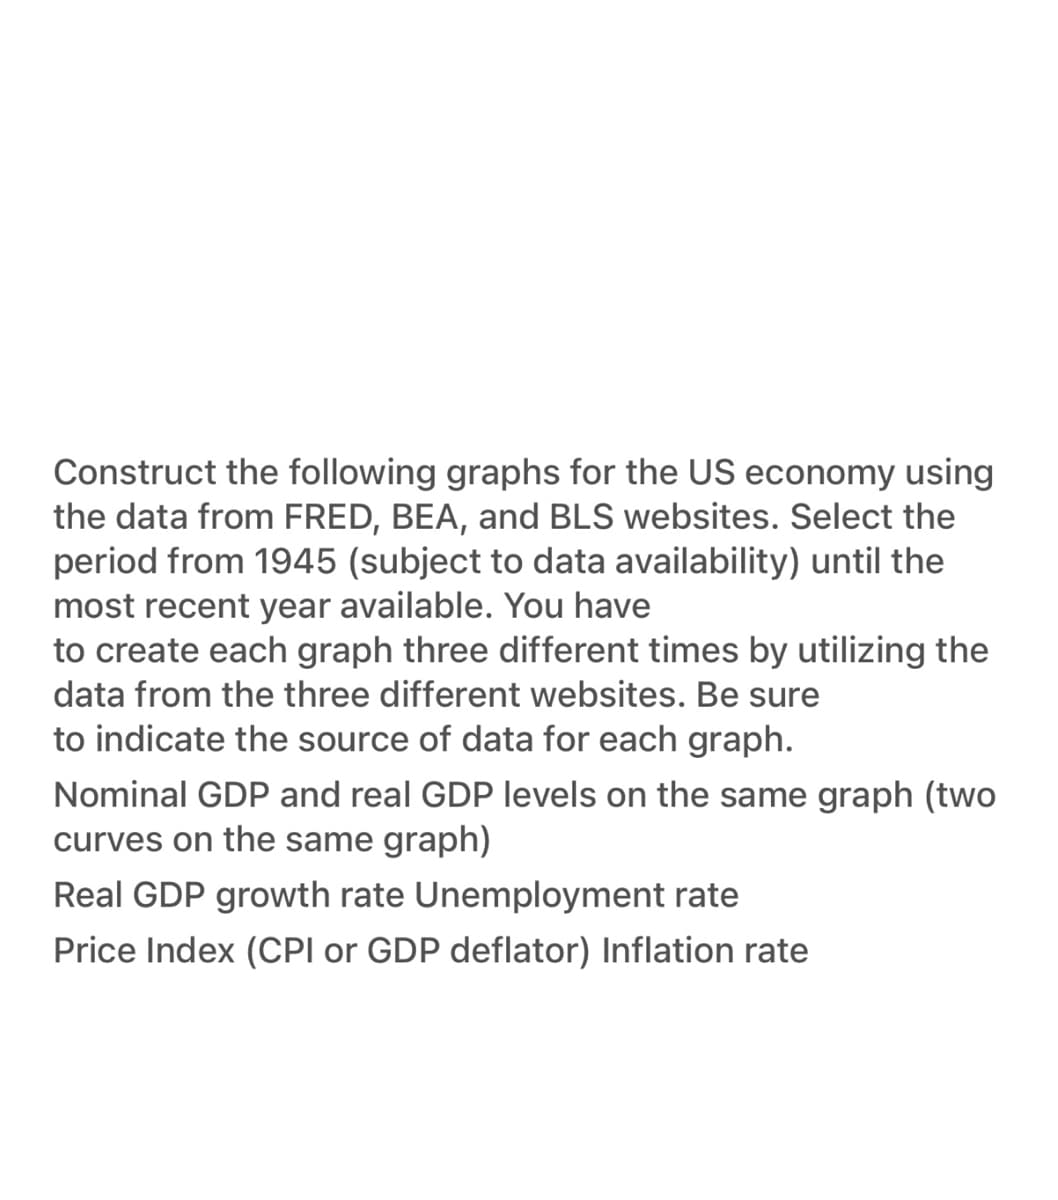 Construct the following graphs for the US economy using
the data from FRED, BEA, and BLS websites. Select the
period from 1945 (subject to data availability) until the
most recent year available. You have
to create each graph three different times by utilizing the
data from the three different websites. Be sure
to indicate the source of data for each graph.
Nominal GDP and real GDP levels on the same graph (two
curves on the same graph)
Real GDP growth rate Unemployment rate
Price Index (CPI or GDP deflator) Inflation rate
